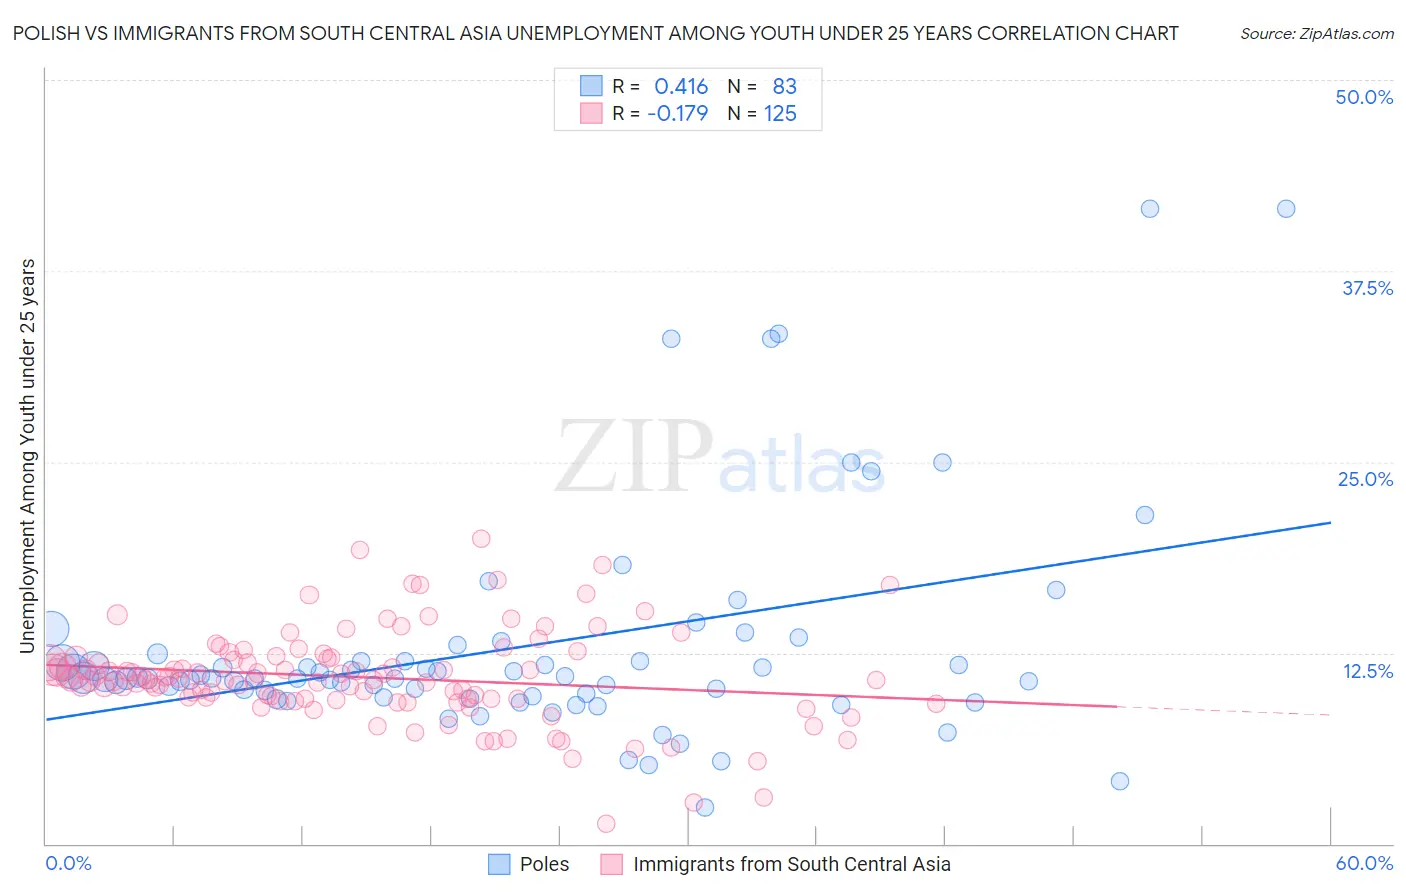 Polish vs Immigrants from South Central Asia Unemployment Among Youth under 25 years